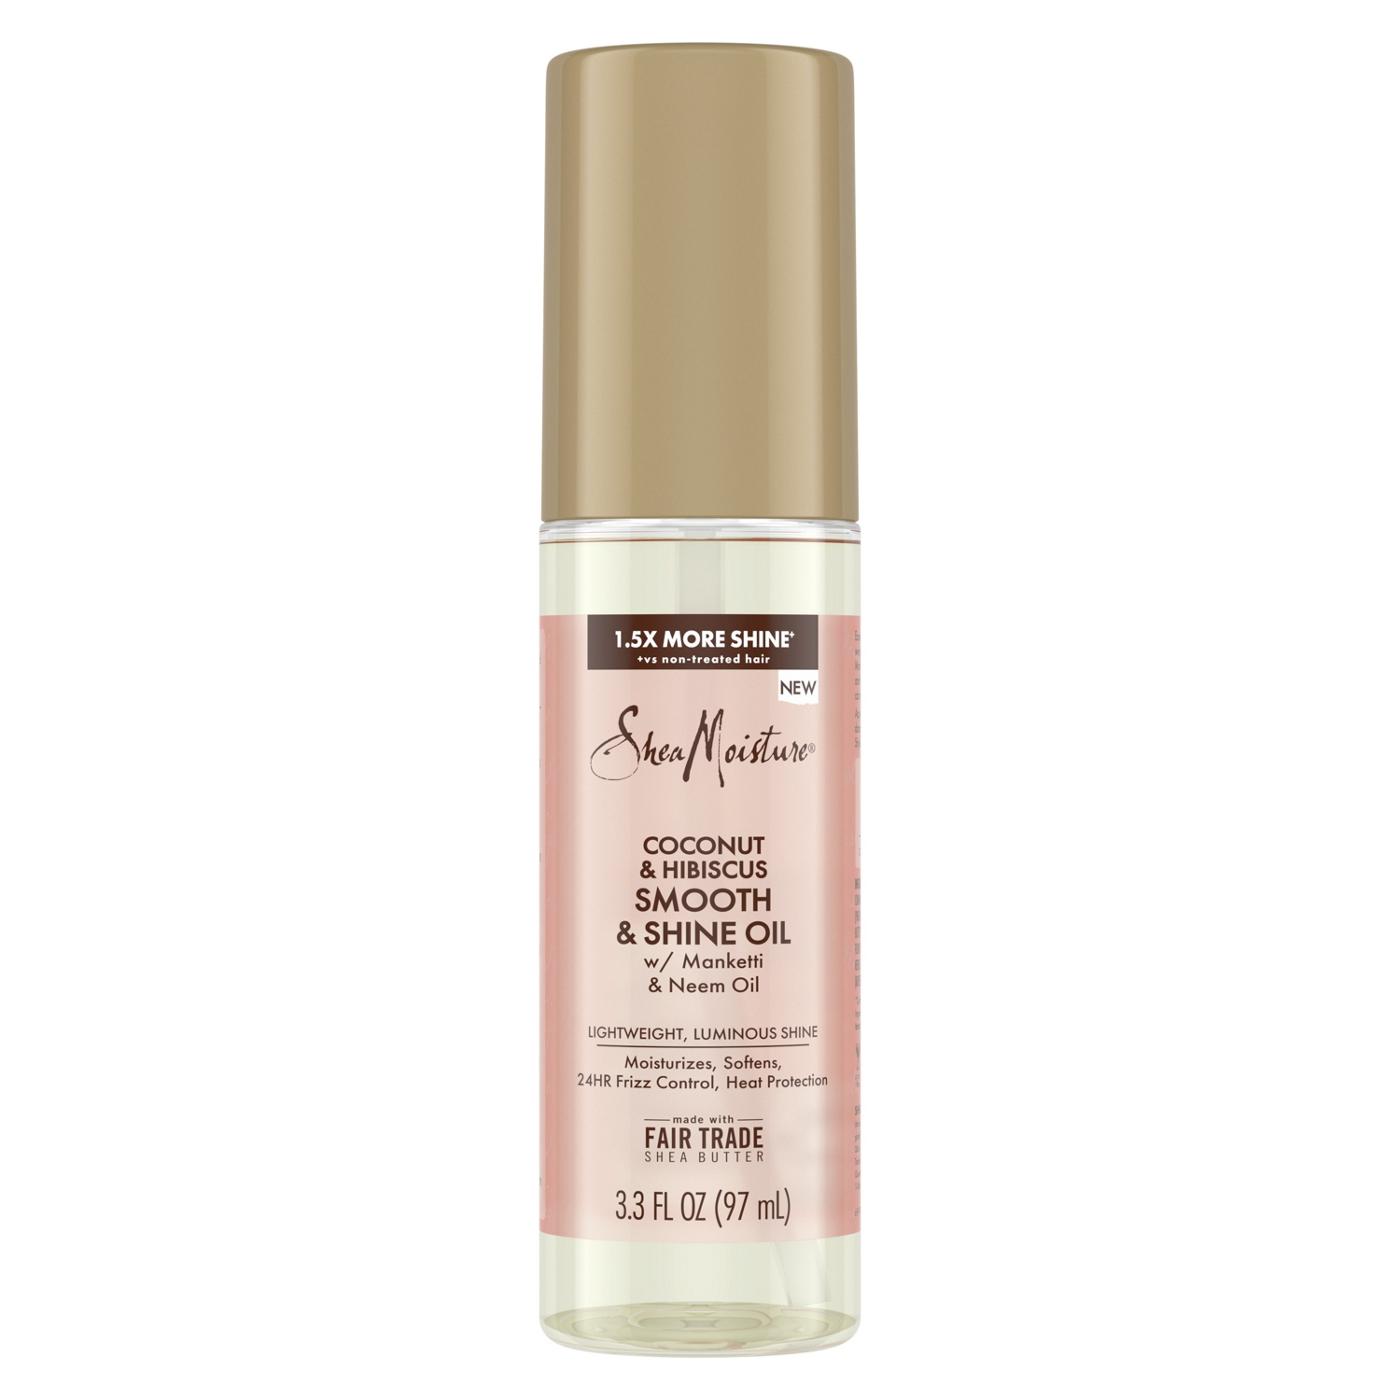 SheaMoisture Smooth & Shine Oil Coconut & Hibiscus; image 1 of 10